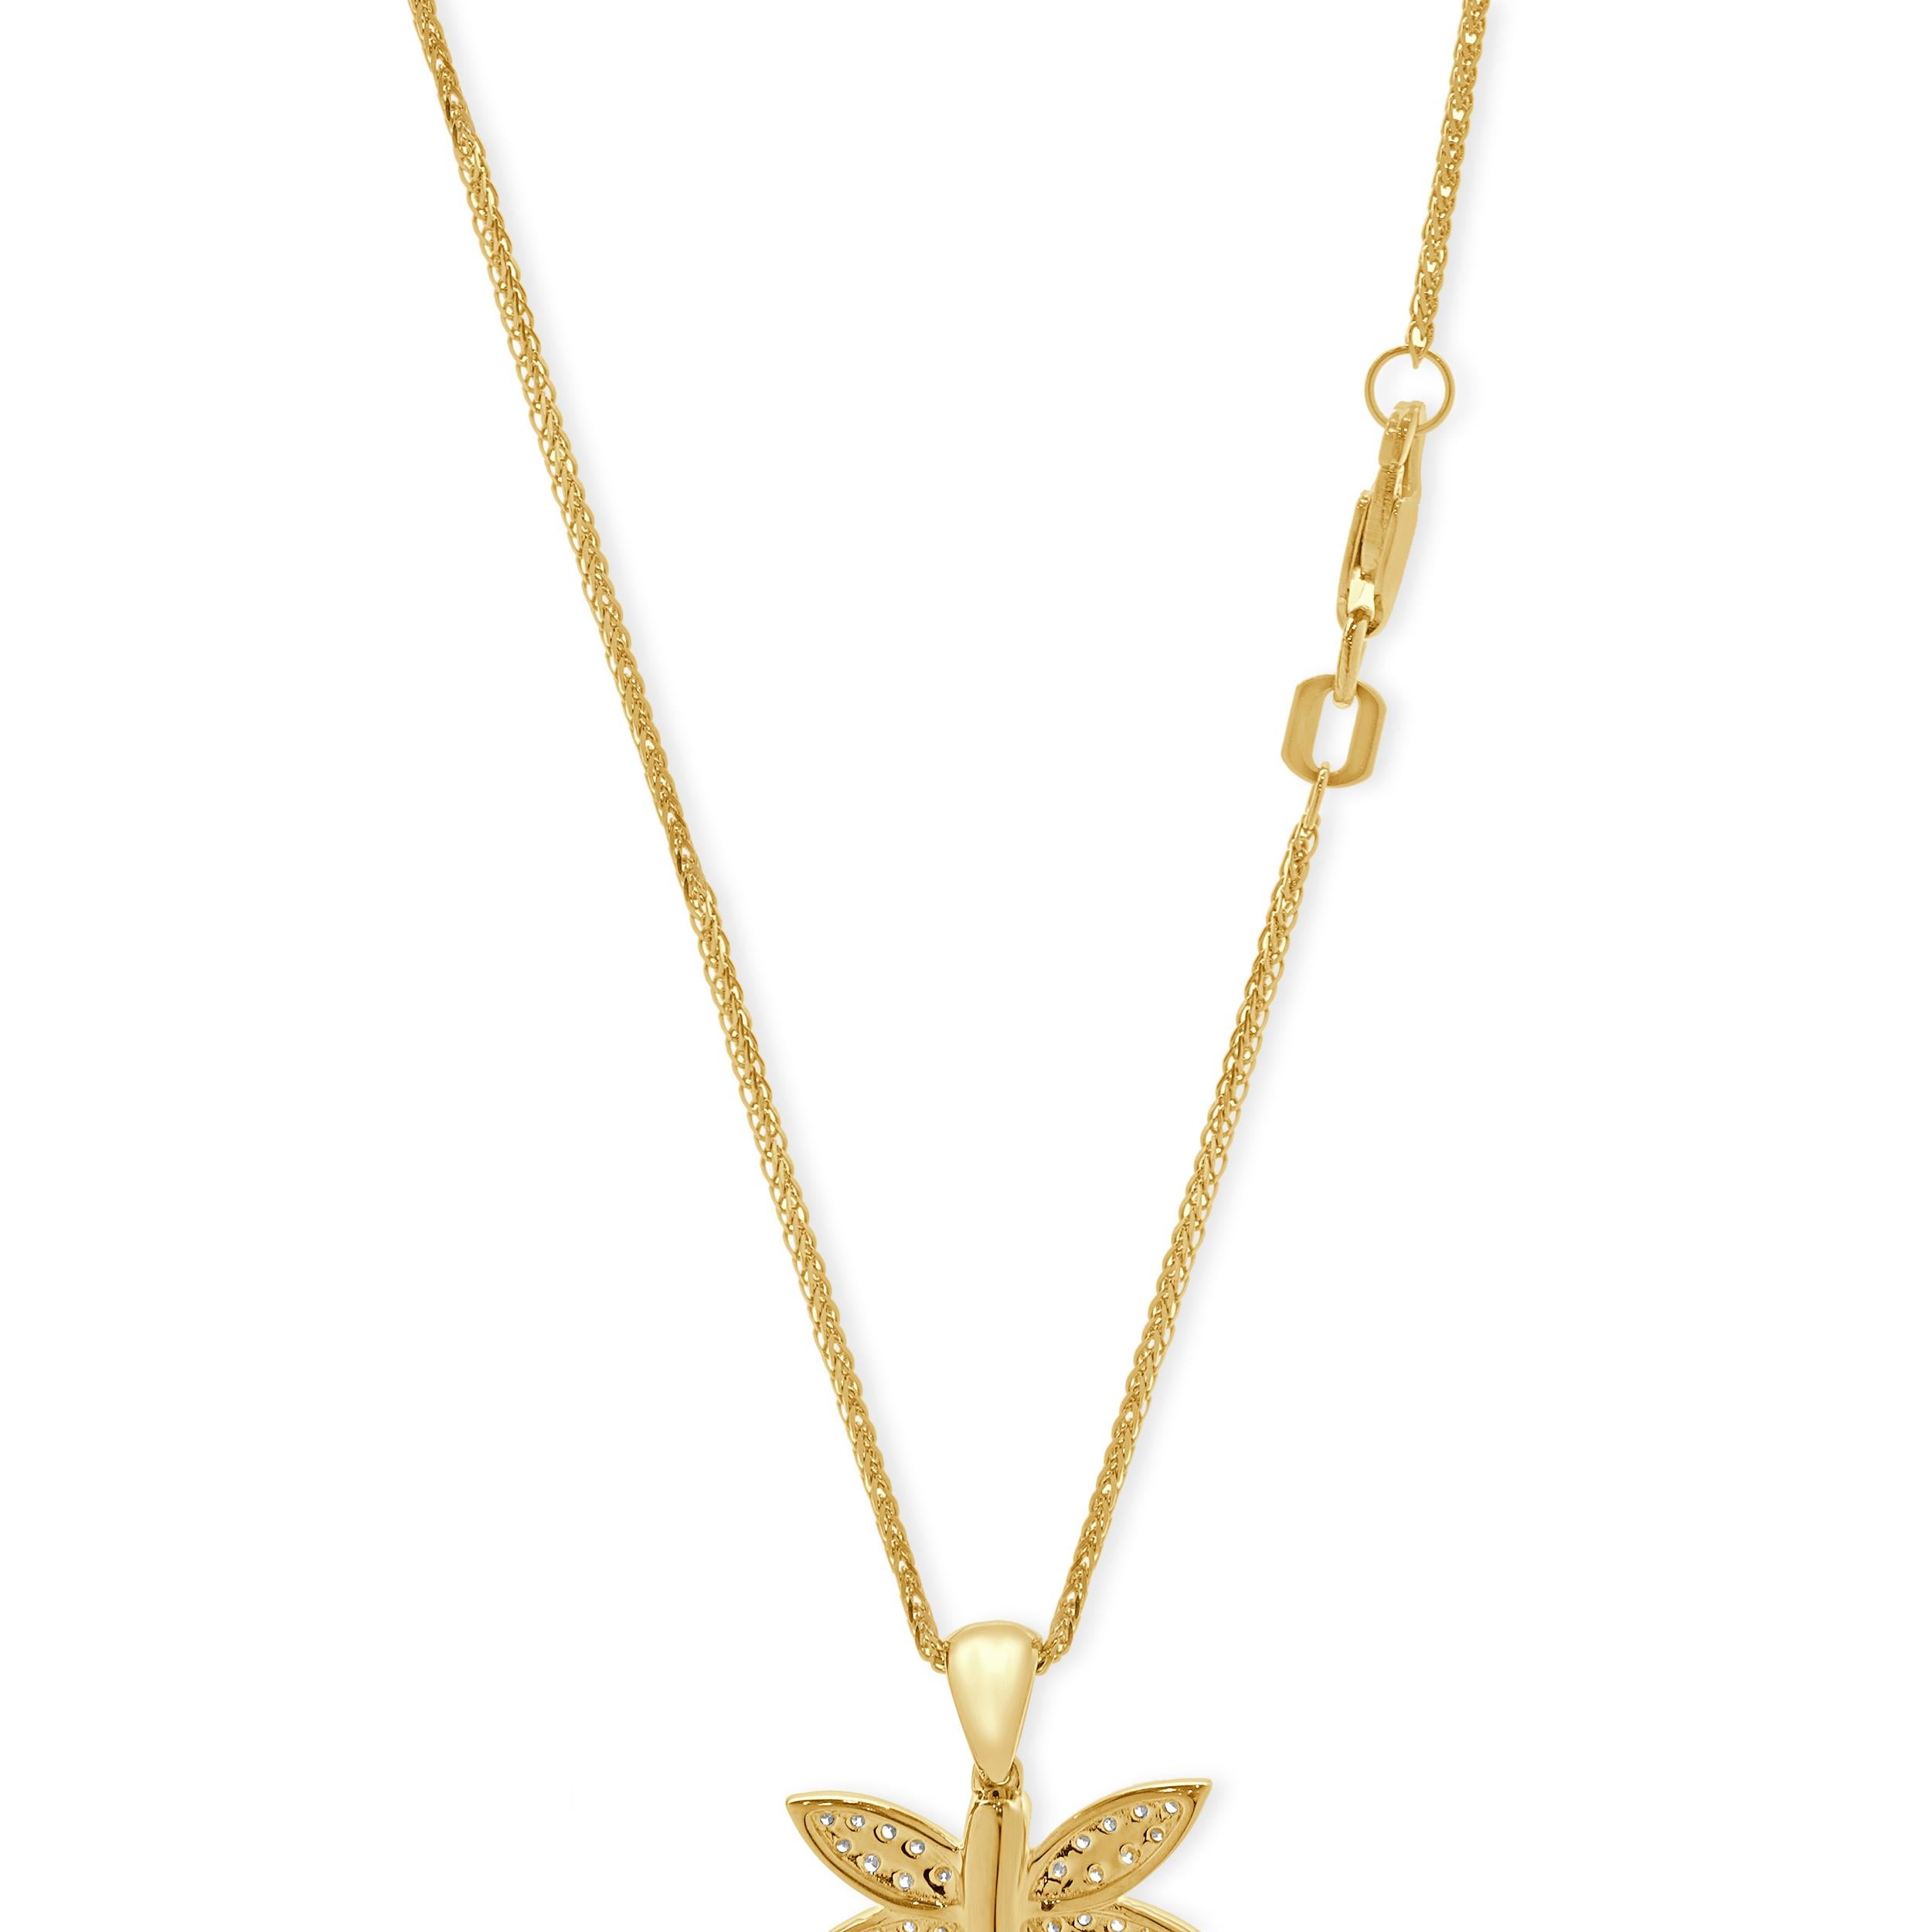 14 Karat Yellow Gold Pave Diamond Dragonfly Necklace In Excellent Condition For Sale In Scottsdale, AZ